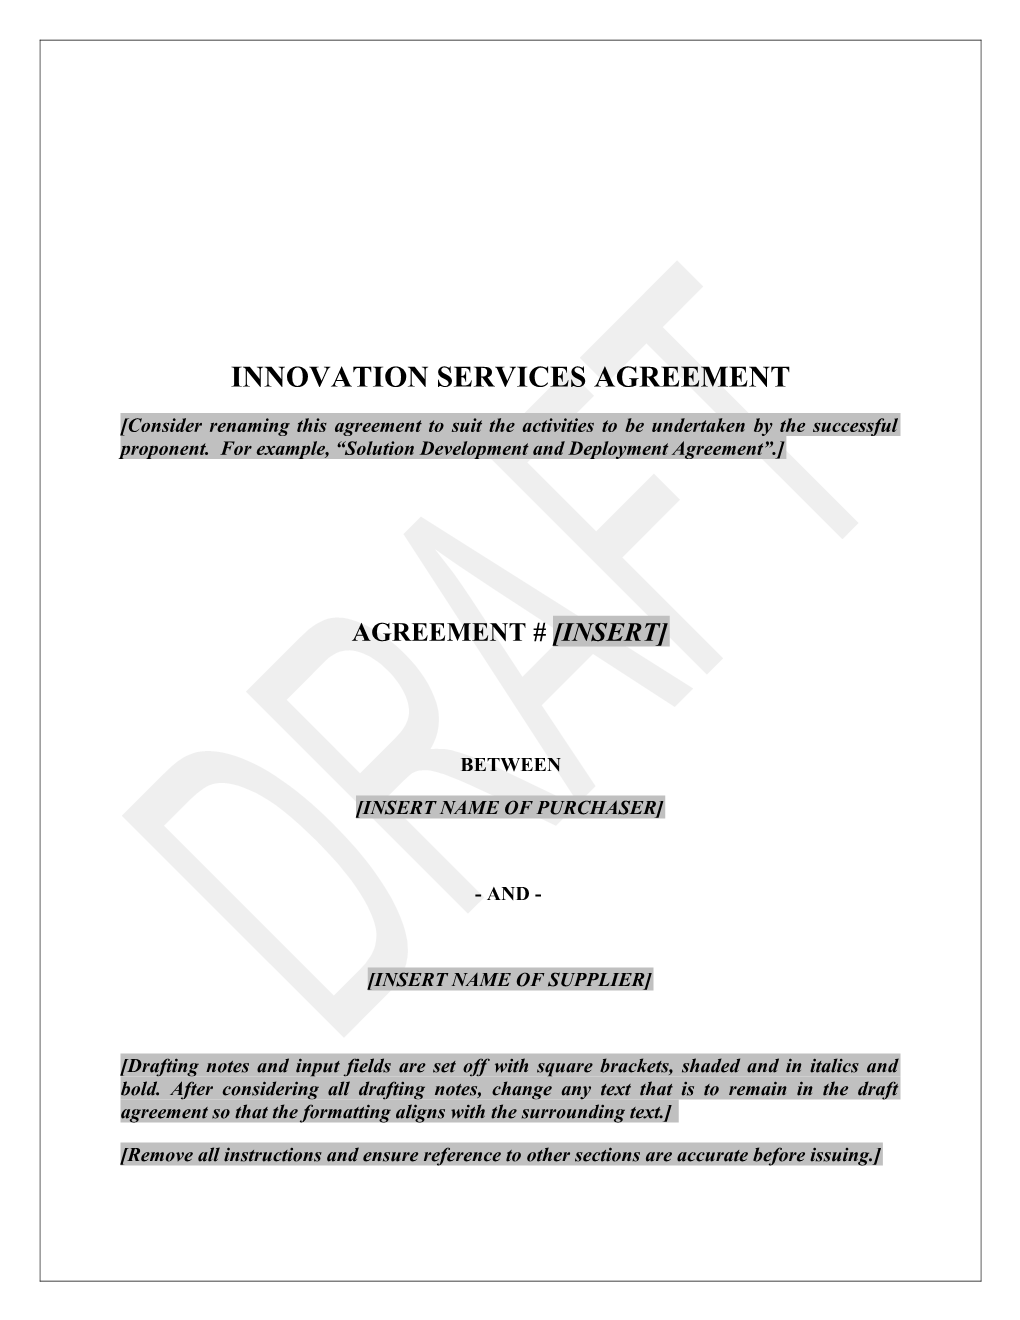 Innovation SERVICES AGREEMENT